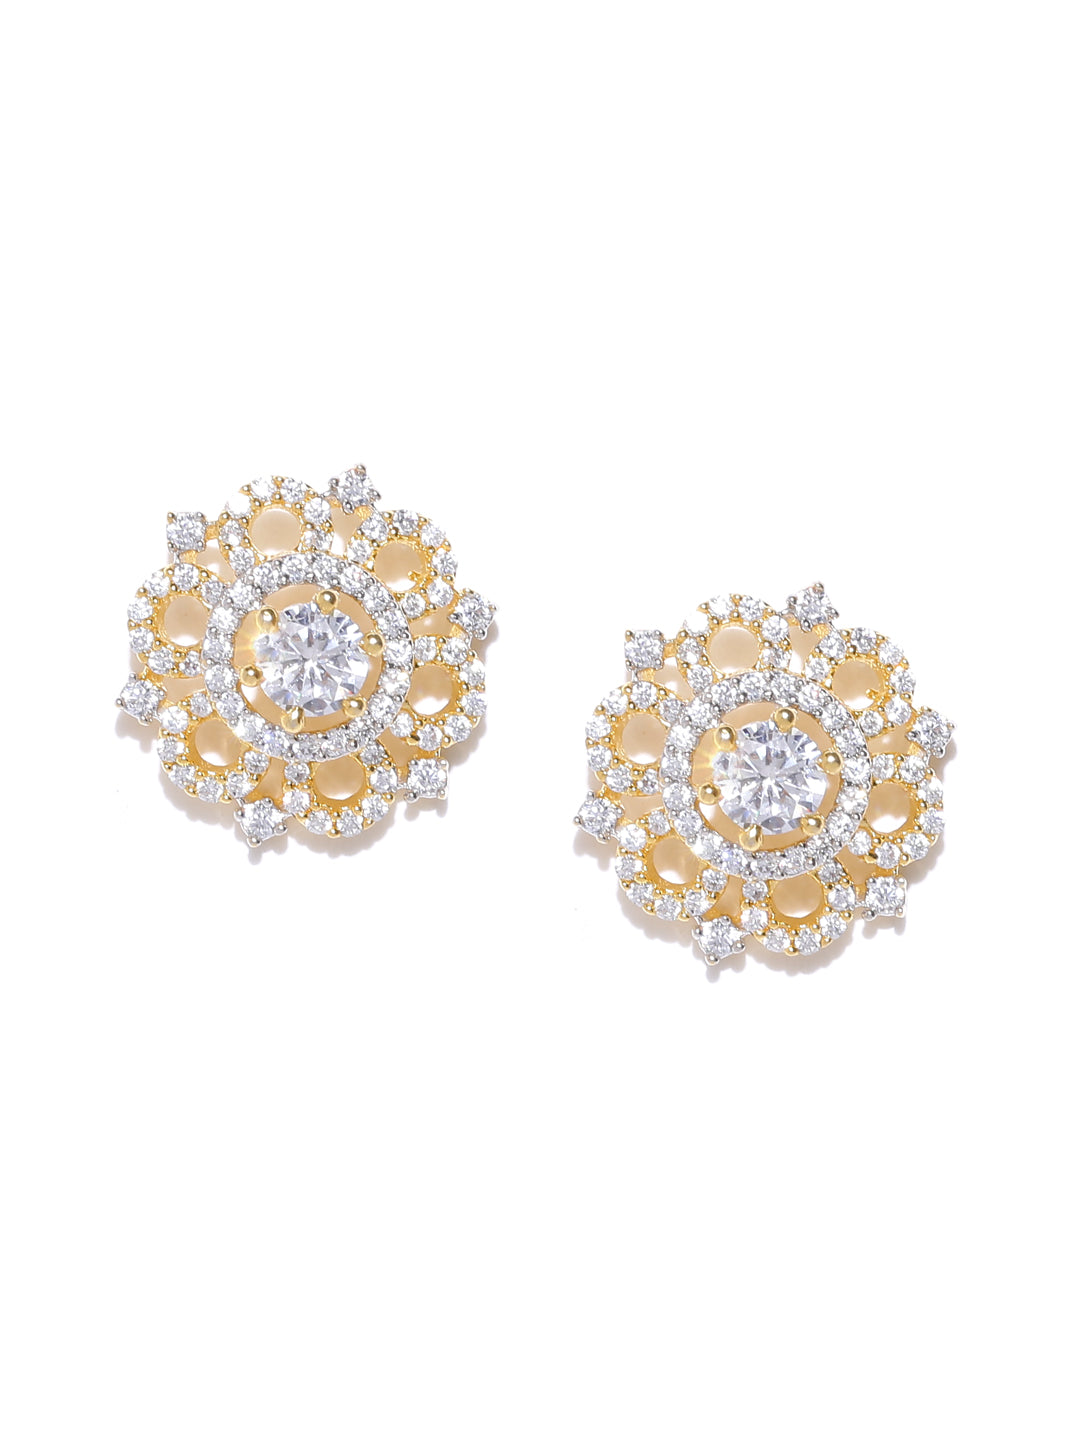 Amazon.com: Gem Stone King 0.80 Ct Round Yellow Citrine White Topaz 14K  Yellow Gold Earrings: Clothing, Shoes & Jewelry